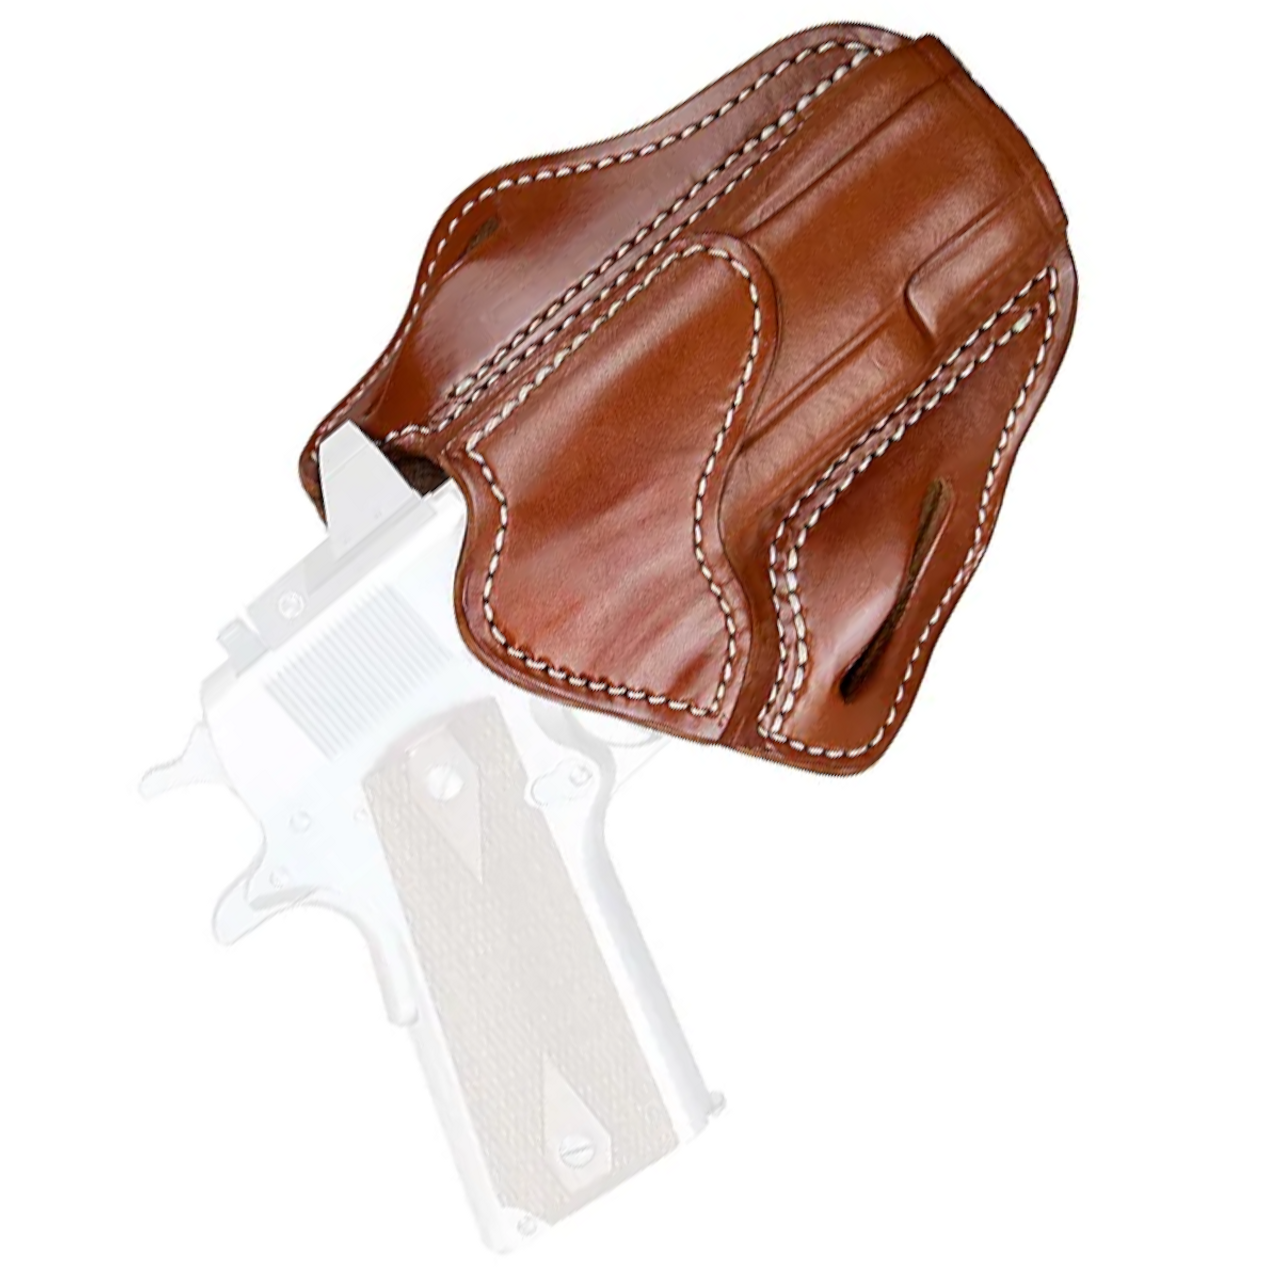 Leather Holsters - 1791 Gunleather